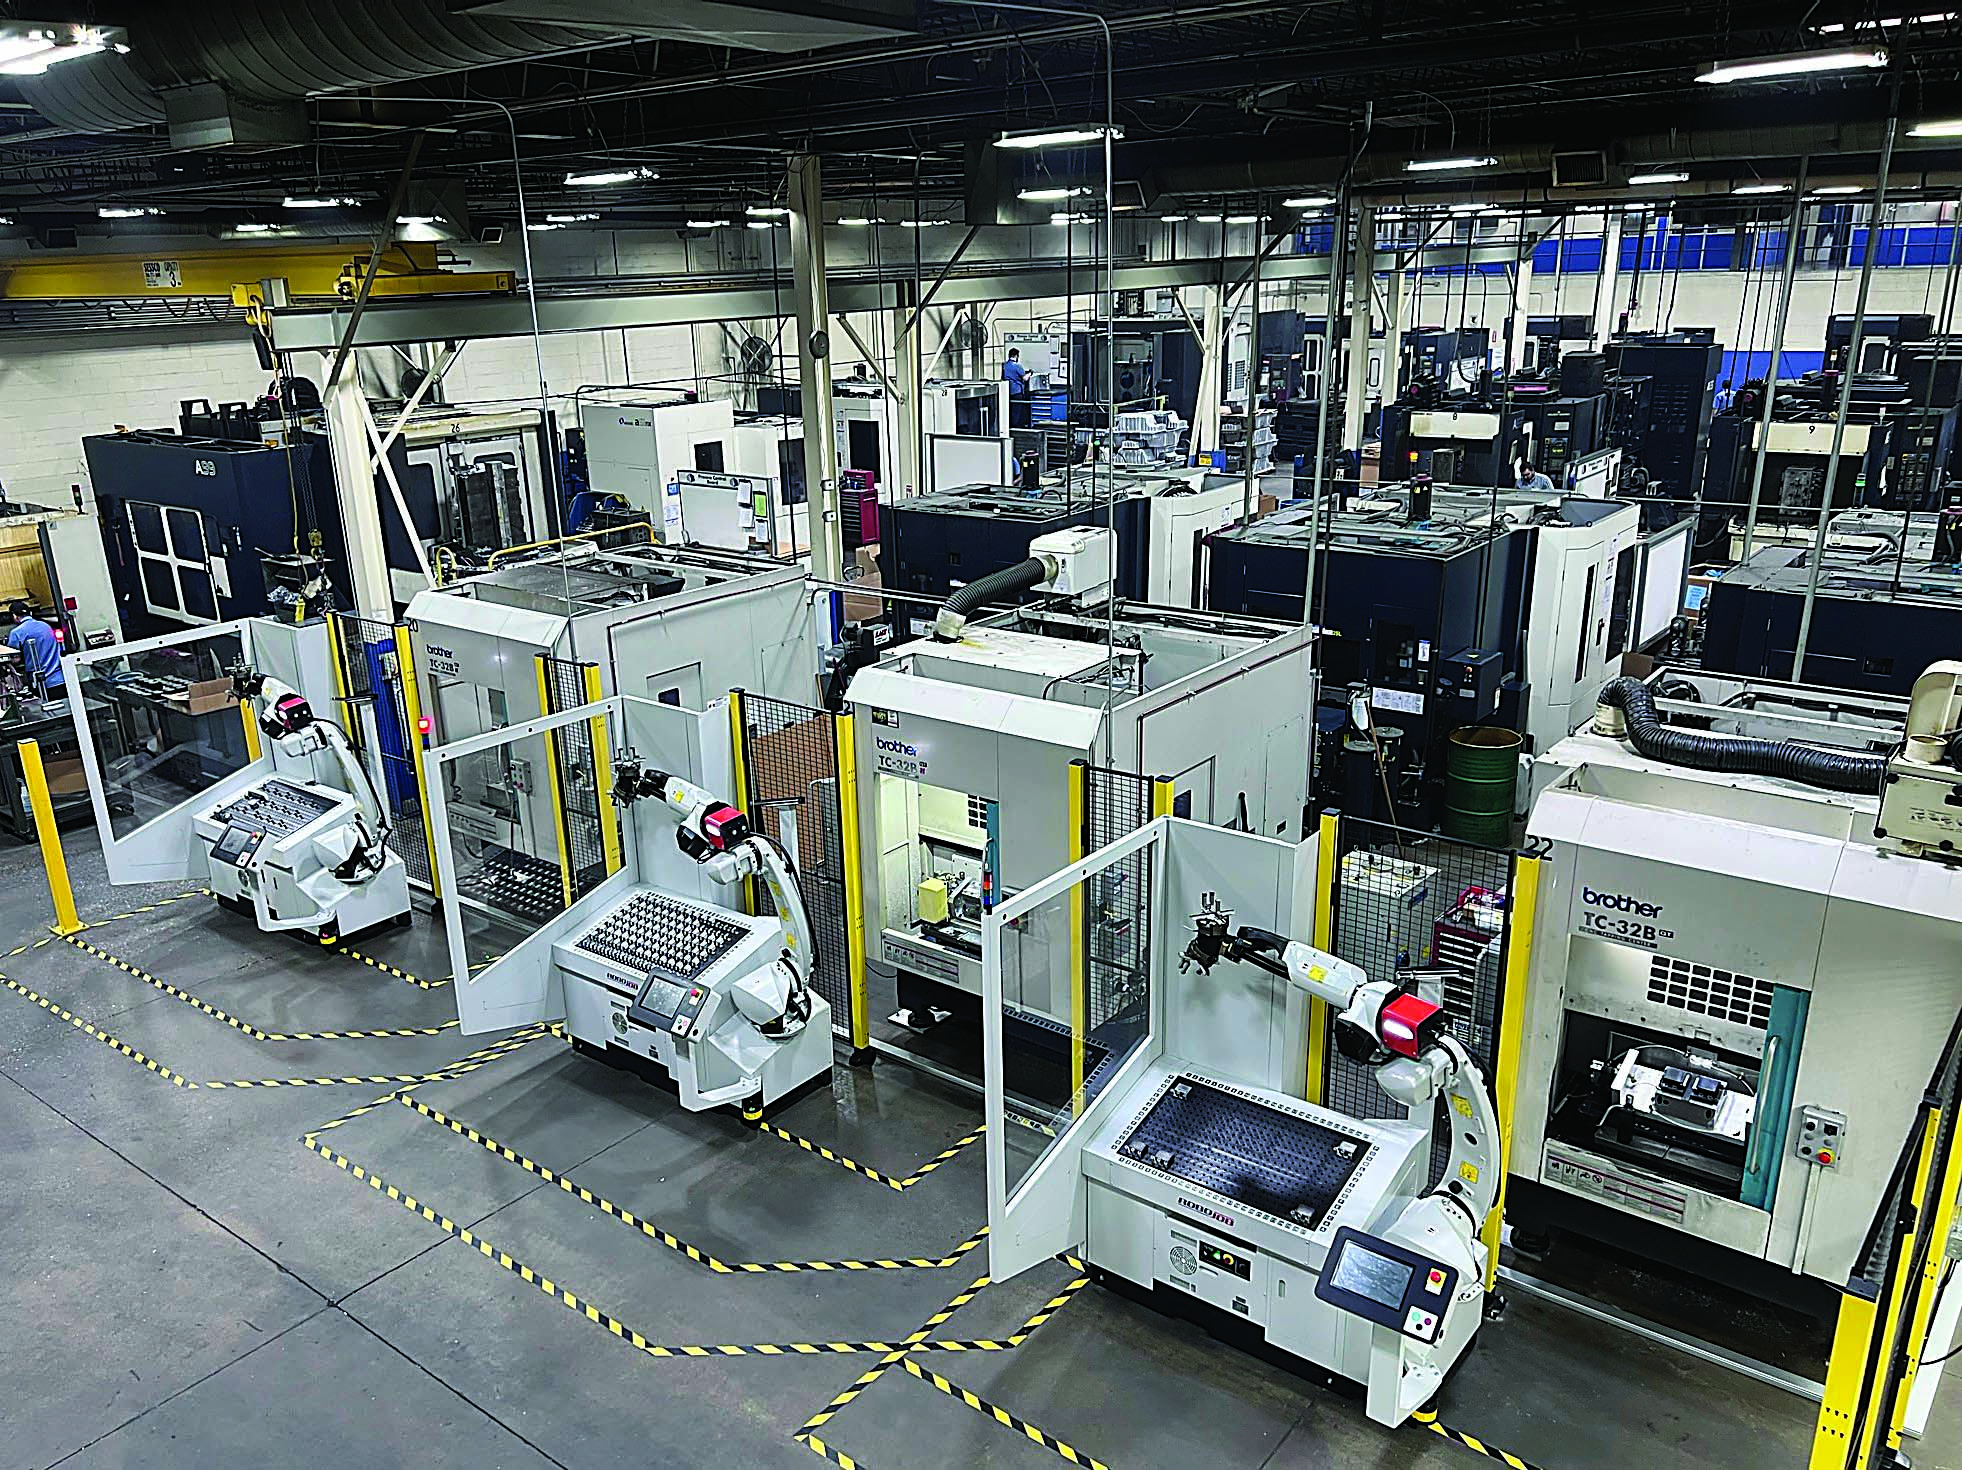 For maximum safety and efficiency, ideally each CNC machine is governed by a dedicated robot.